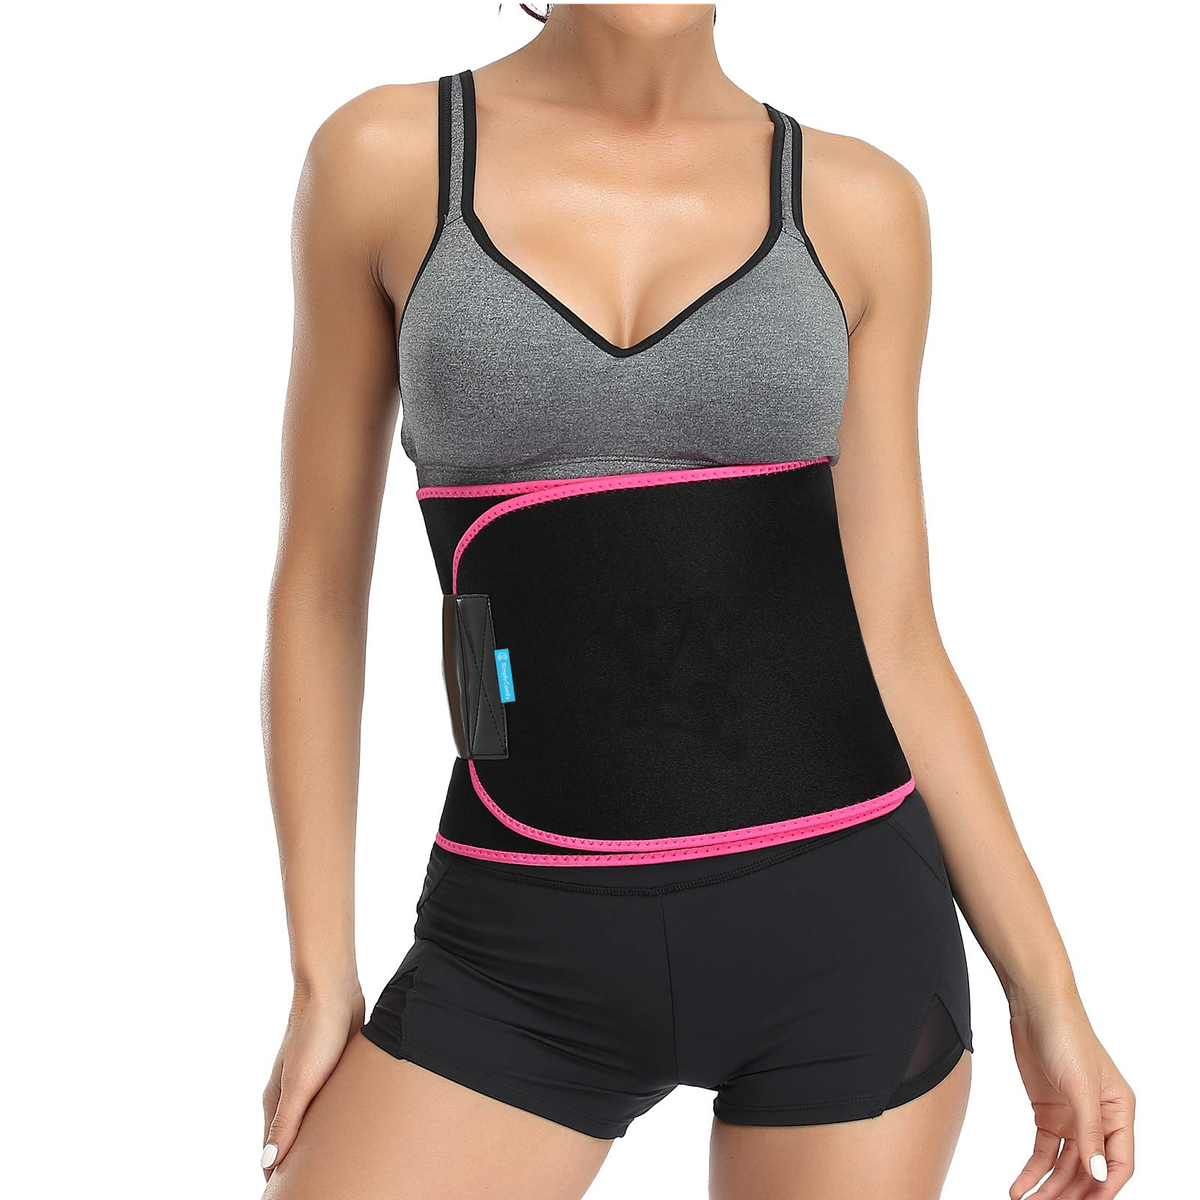 Body Shaper Fabric Sweet Sweat Waist Trimmer Belt, For Gym, Waist Size:  Free at Rs 120 in Mumbai